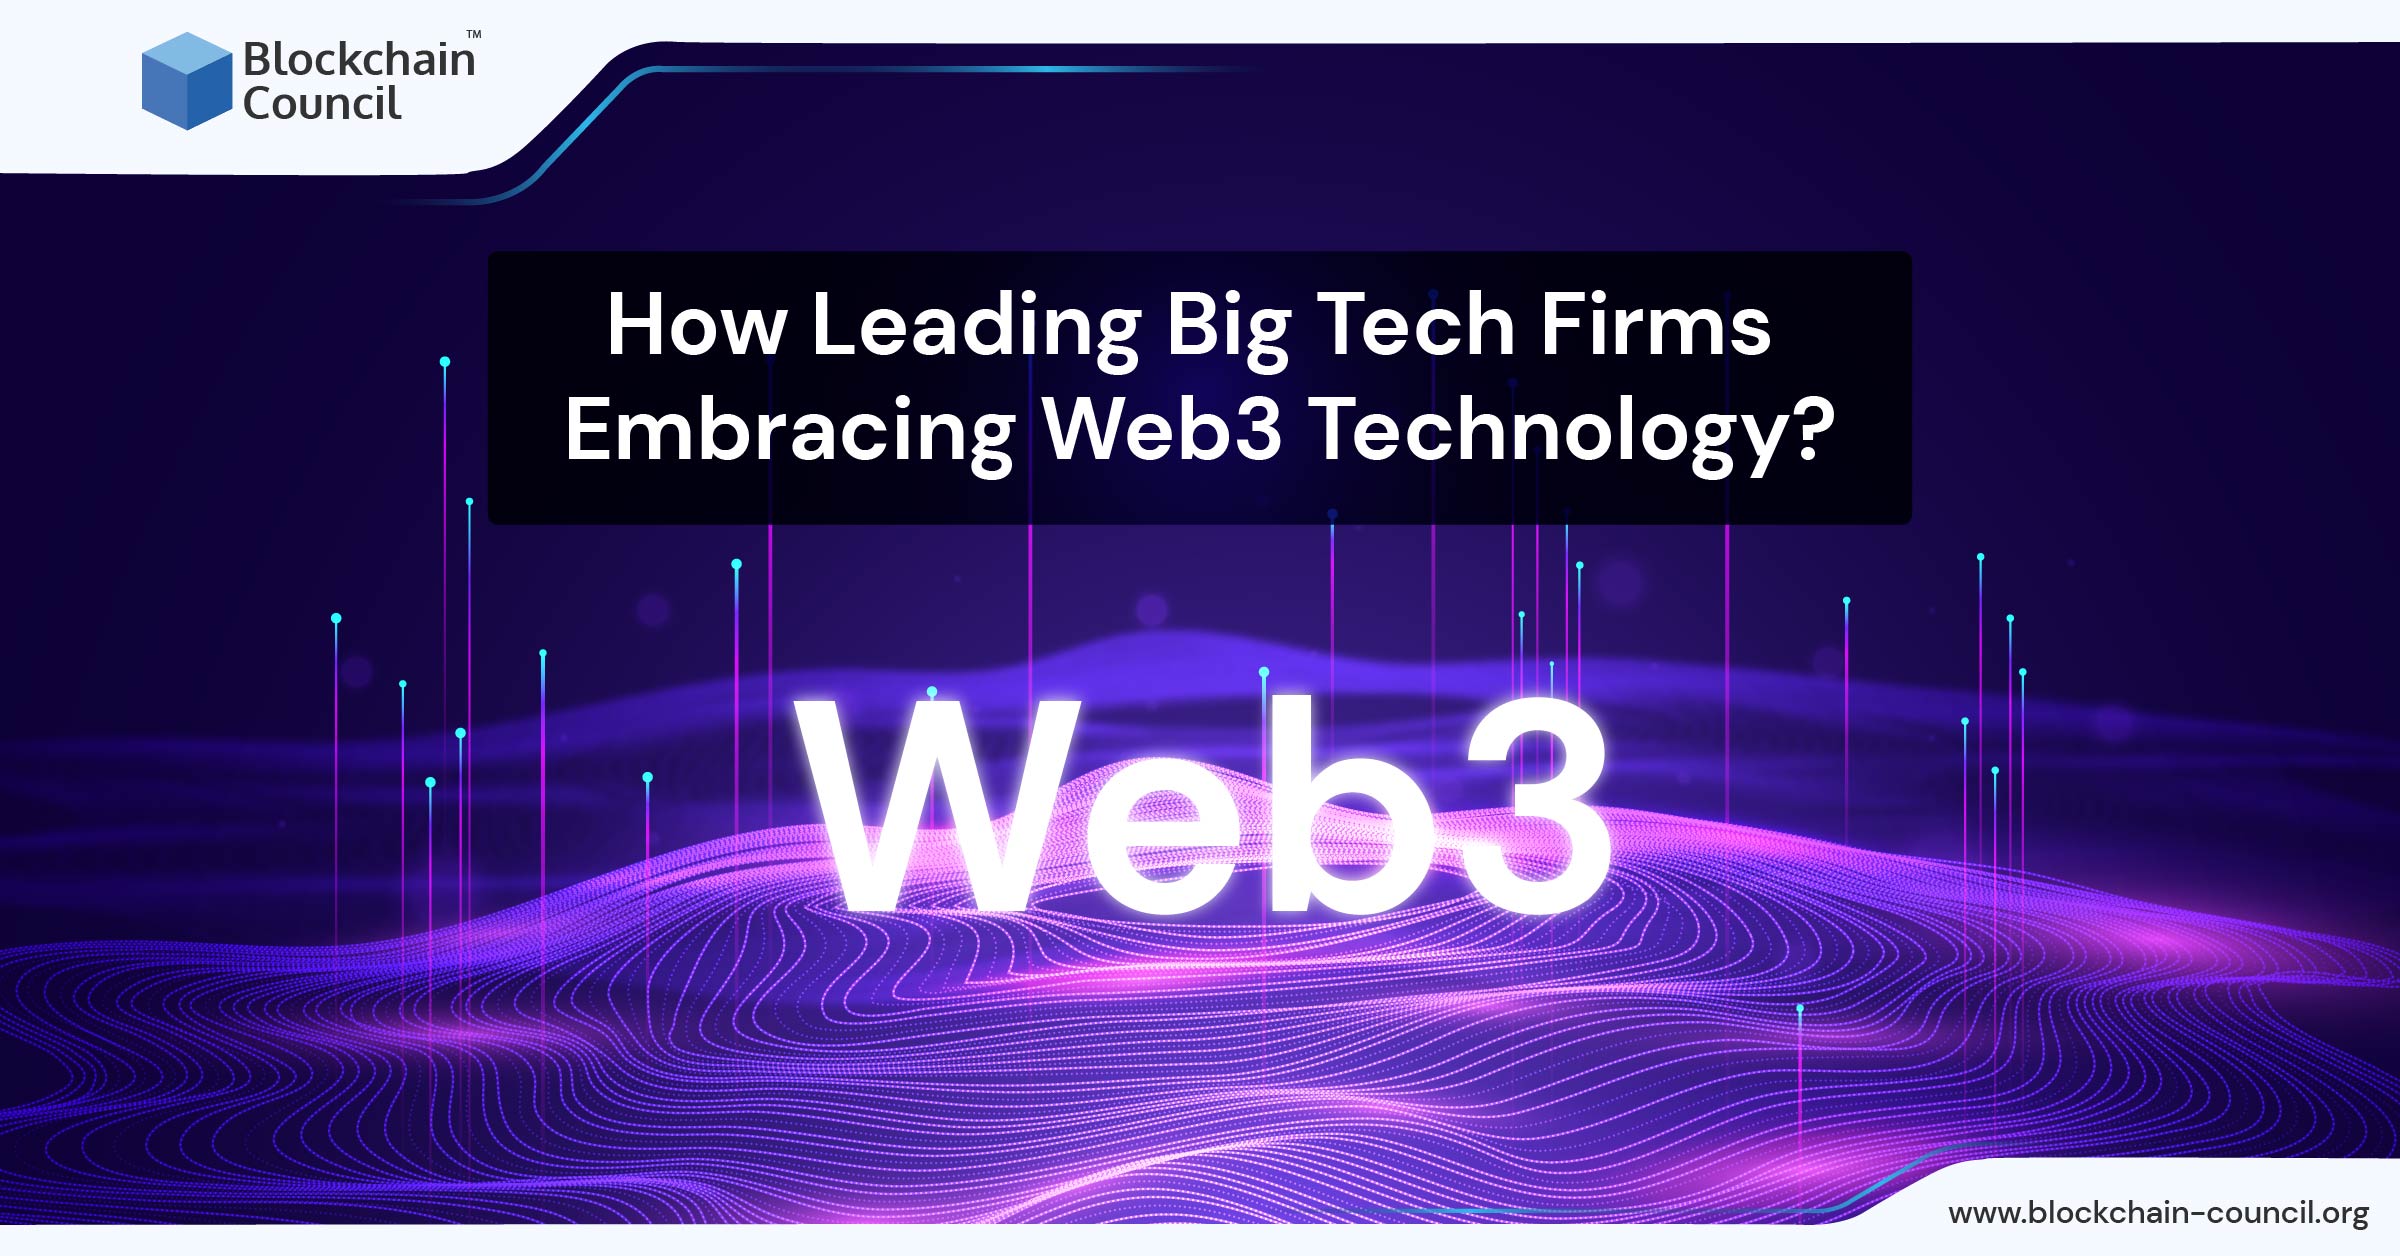 How Leading Big Tech Firms Embracing Web 3 Technology?